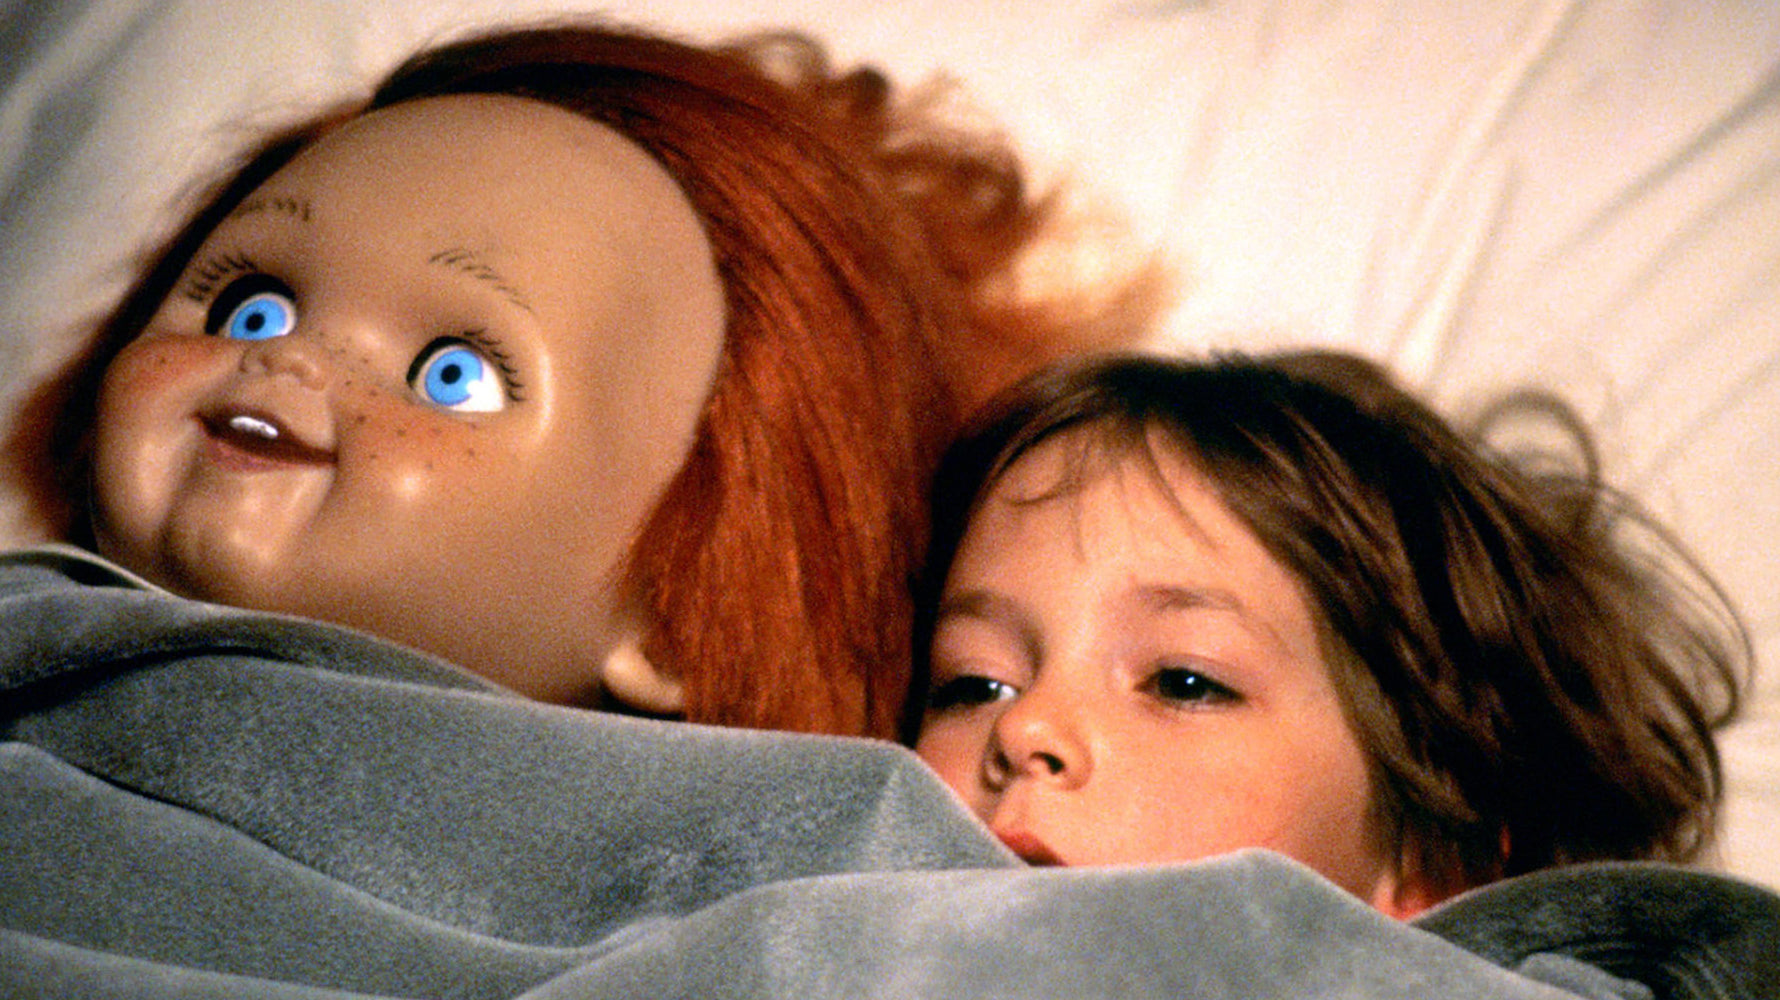 The Child's Play Franchise: Why We Love It